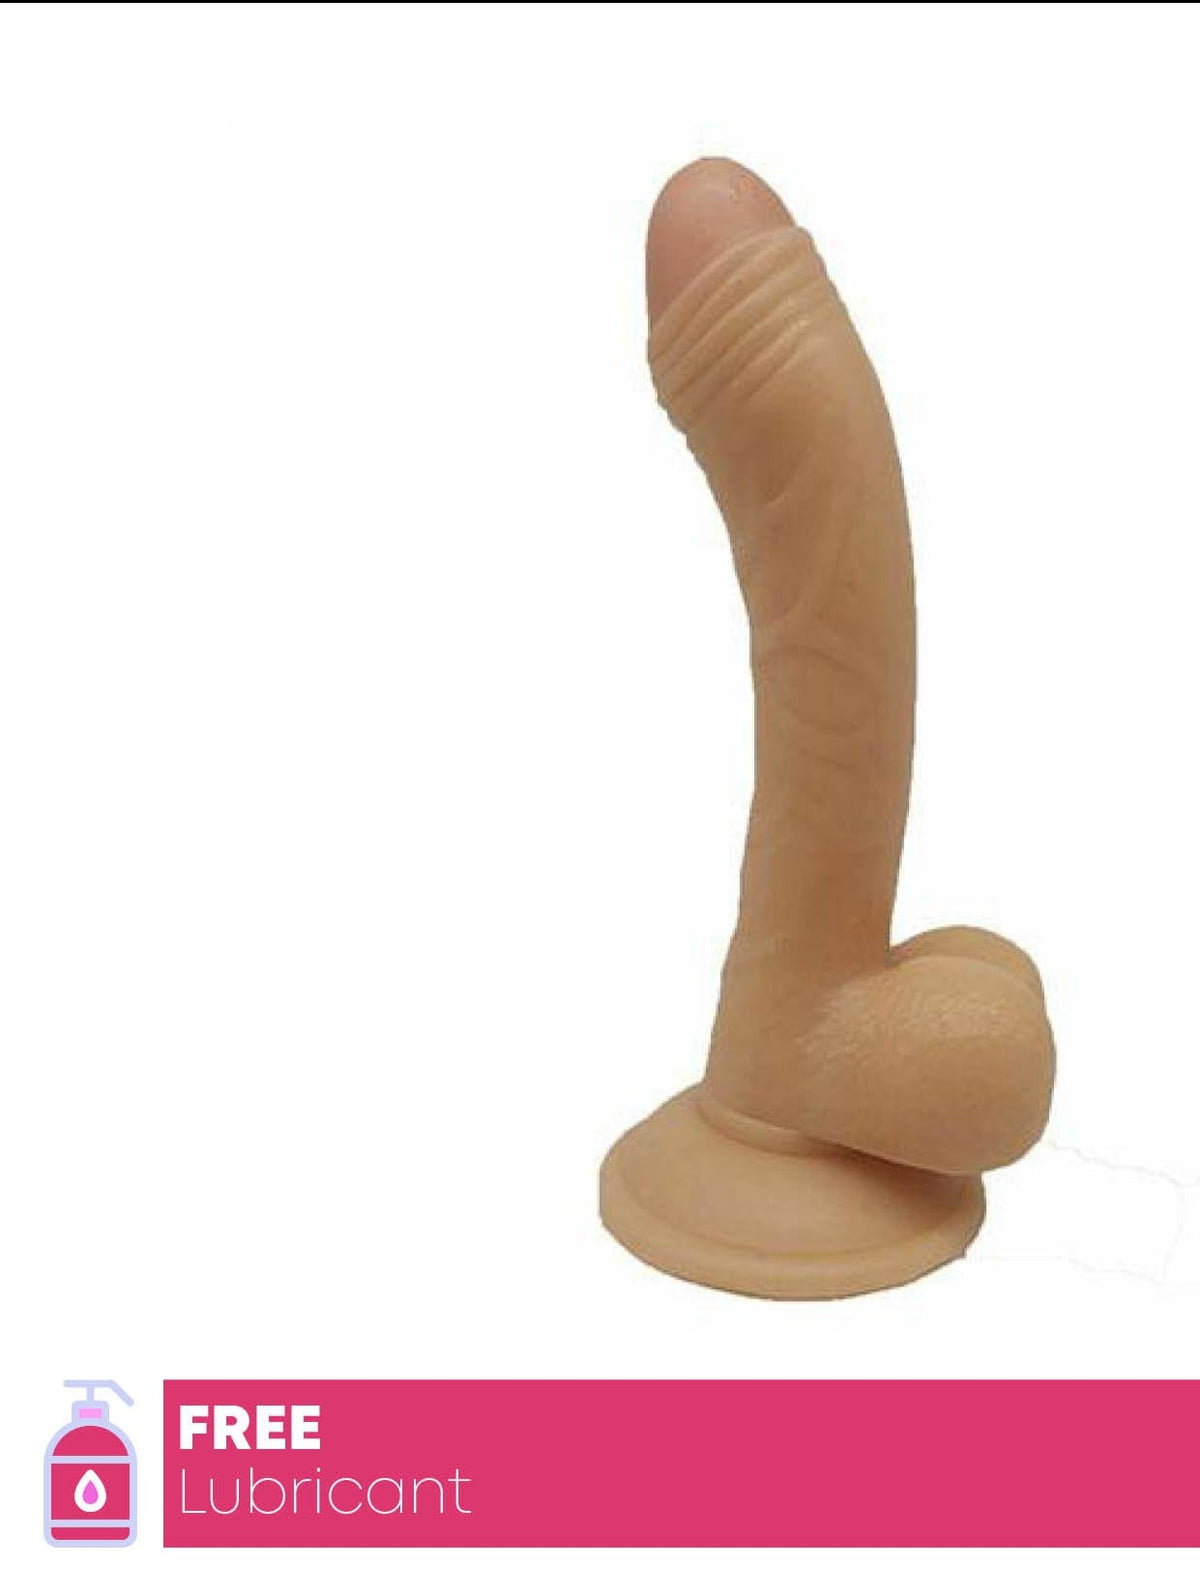 Huge Realistic 7.5" Dildo with a Suction Cup